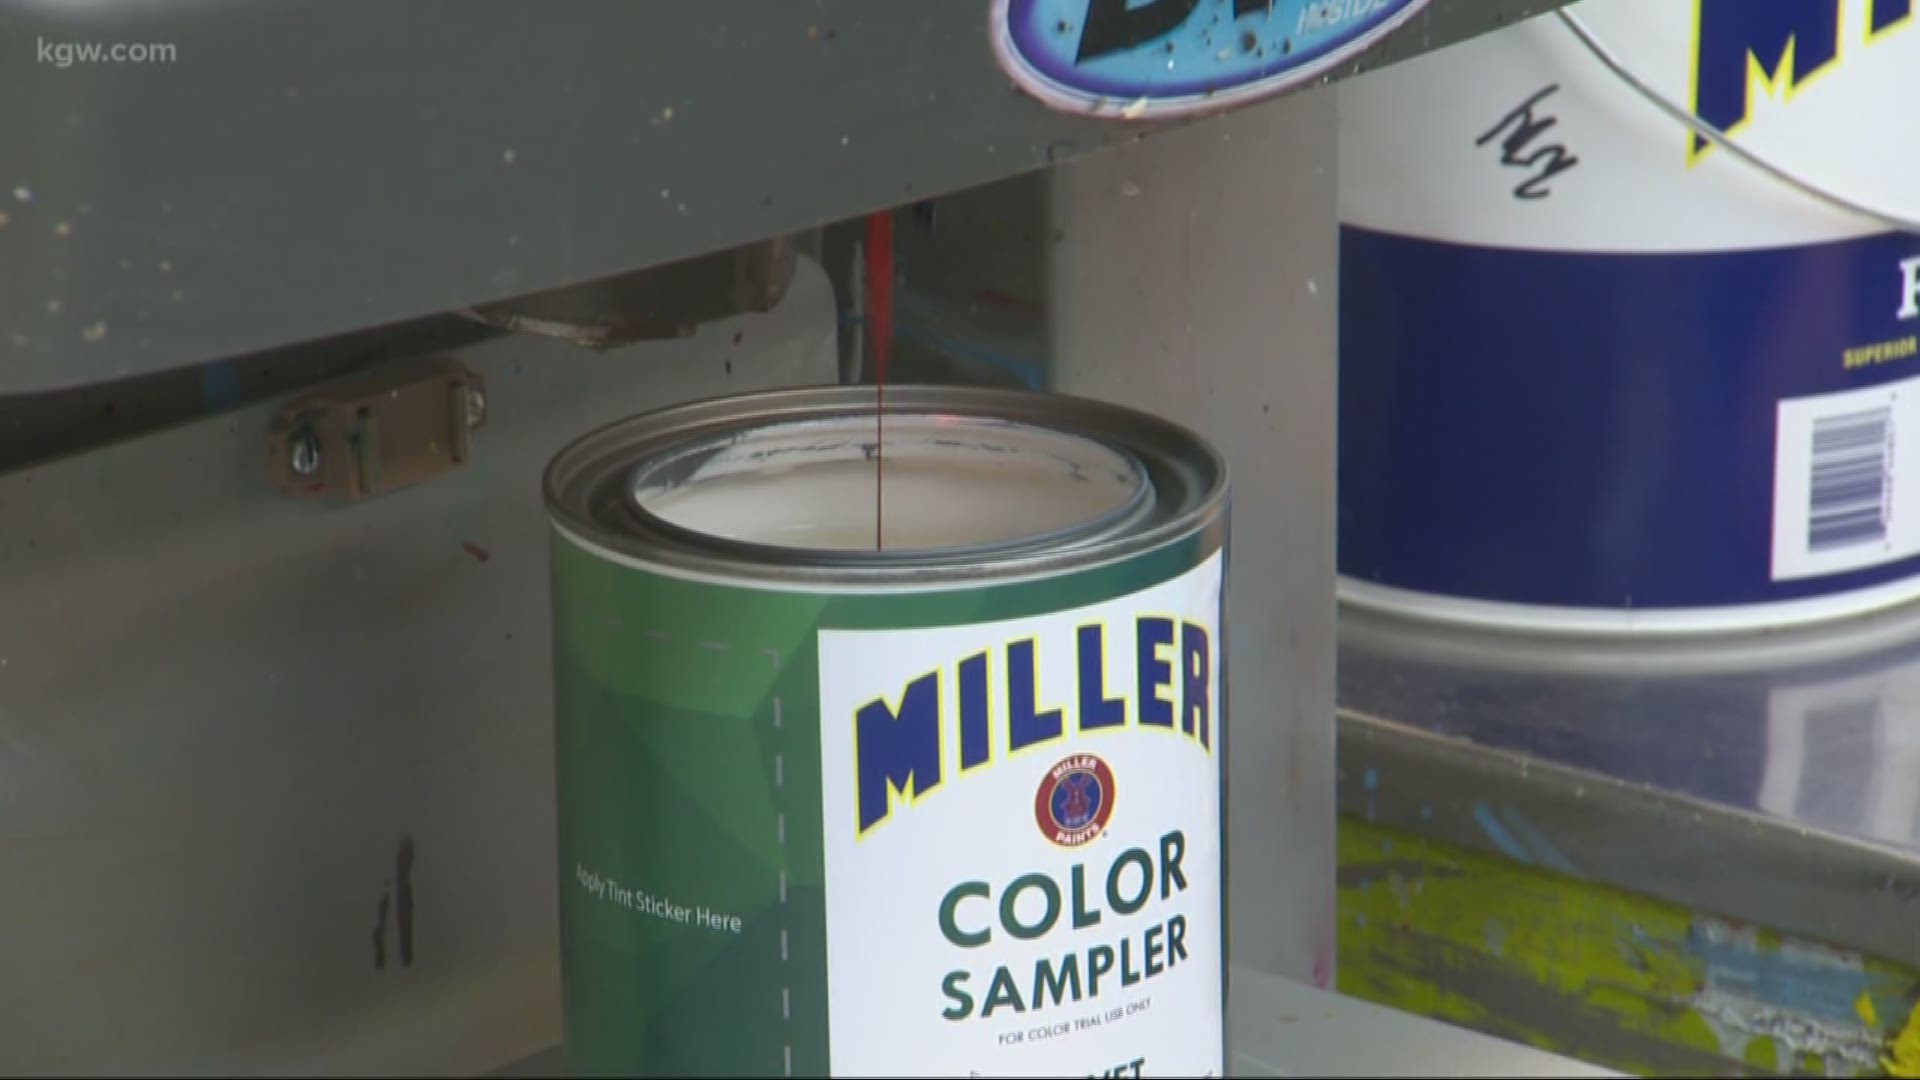 Every Saturday in May & June at Miller Paint you can get a free sample size of paint to find the perfect color for your place.
millerpaint.com
#TonightwithCassidy